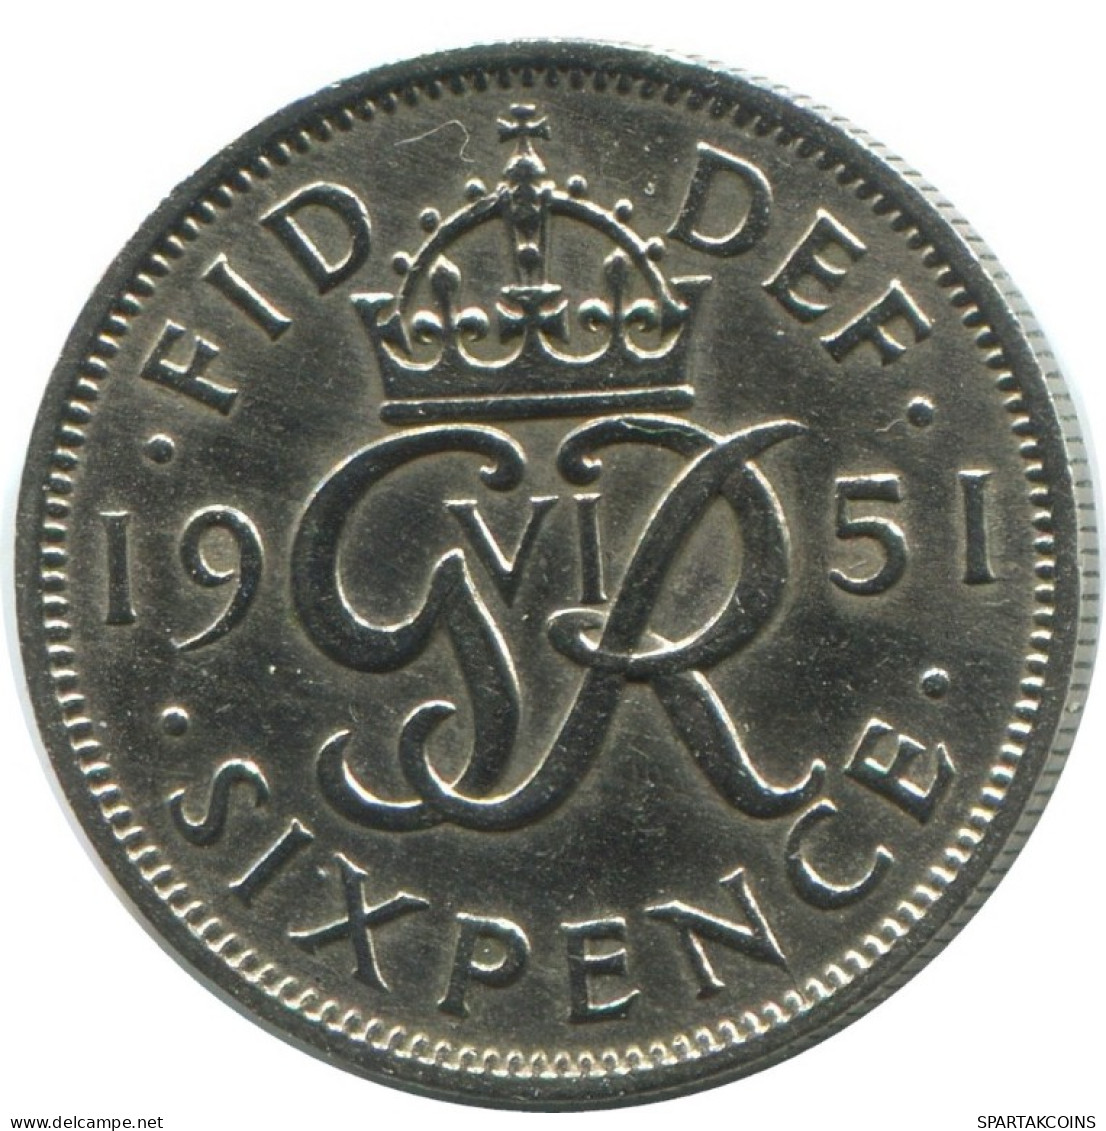 SIXPENCE 1951 UK GREAT BRITAIN SILVER Coin #AG956.1.U.A - H. 6 Pence